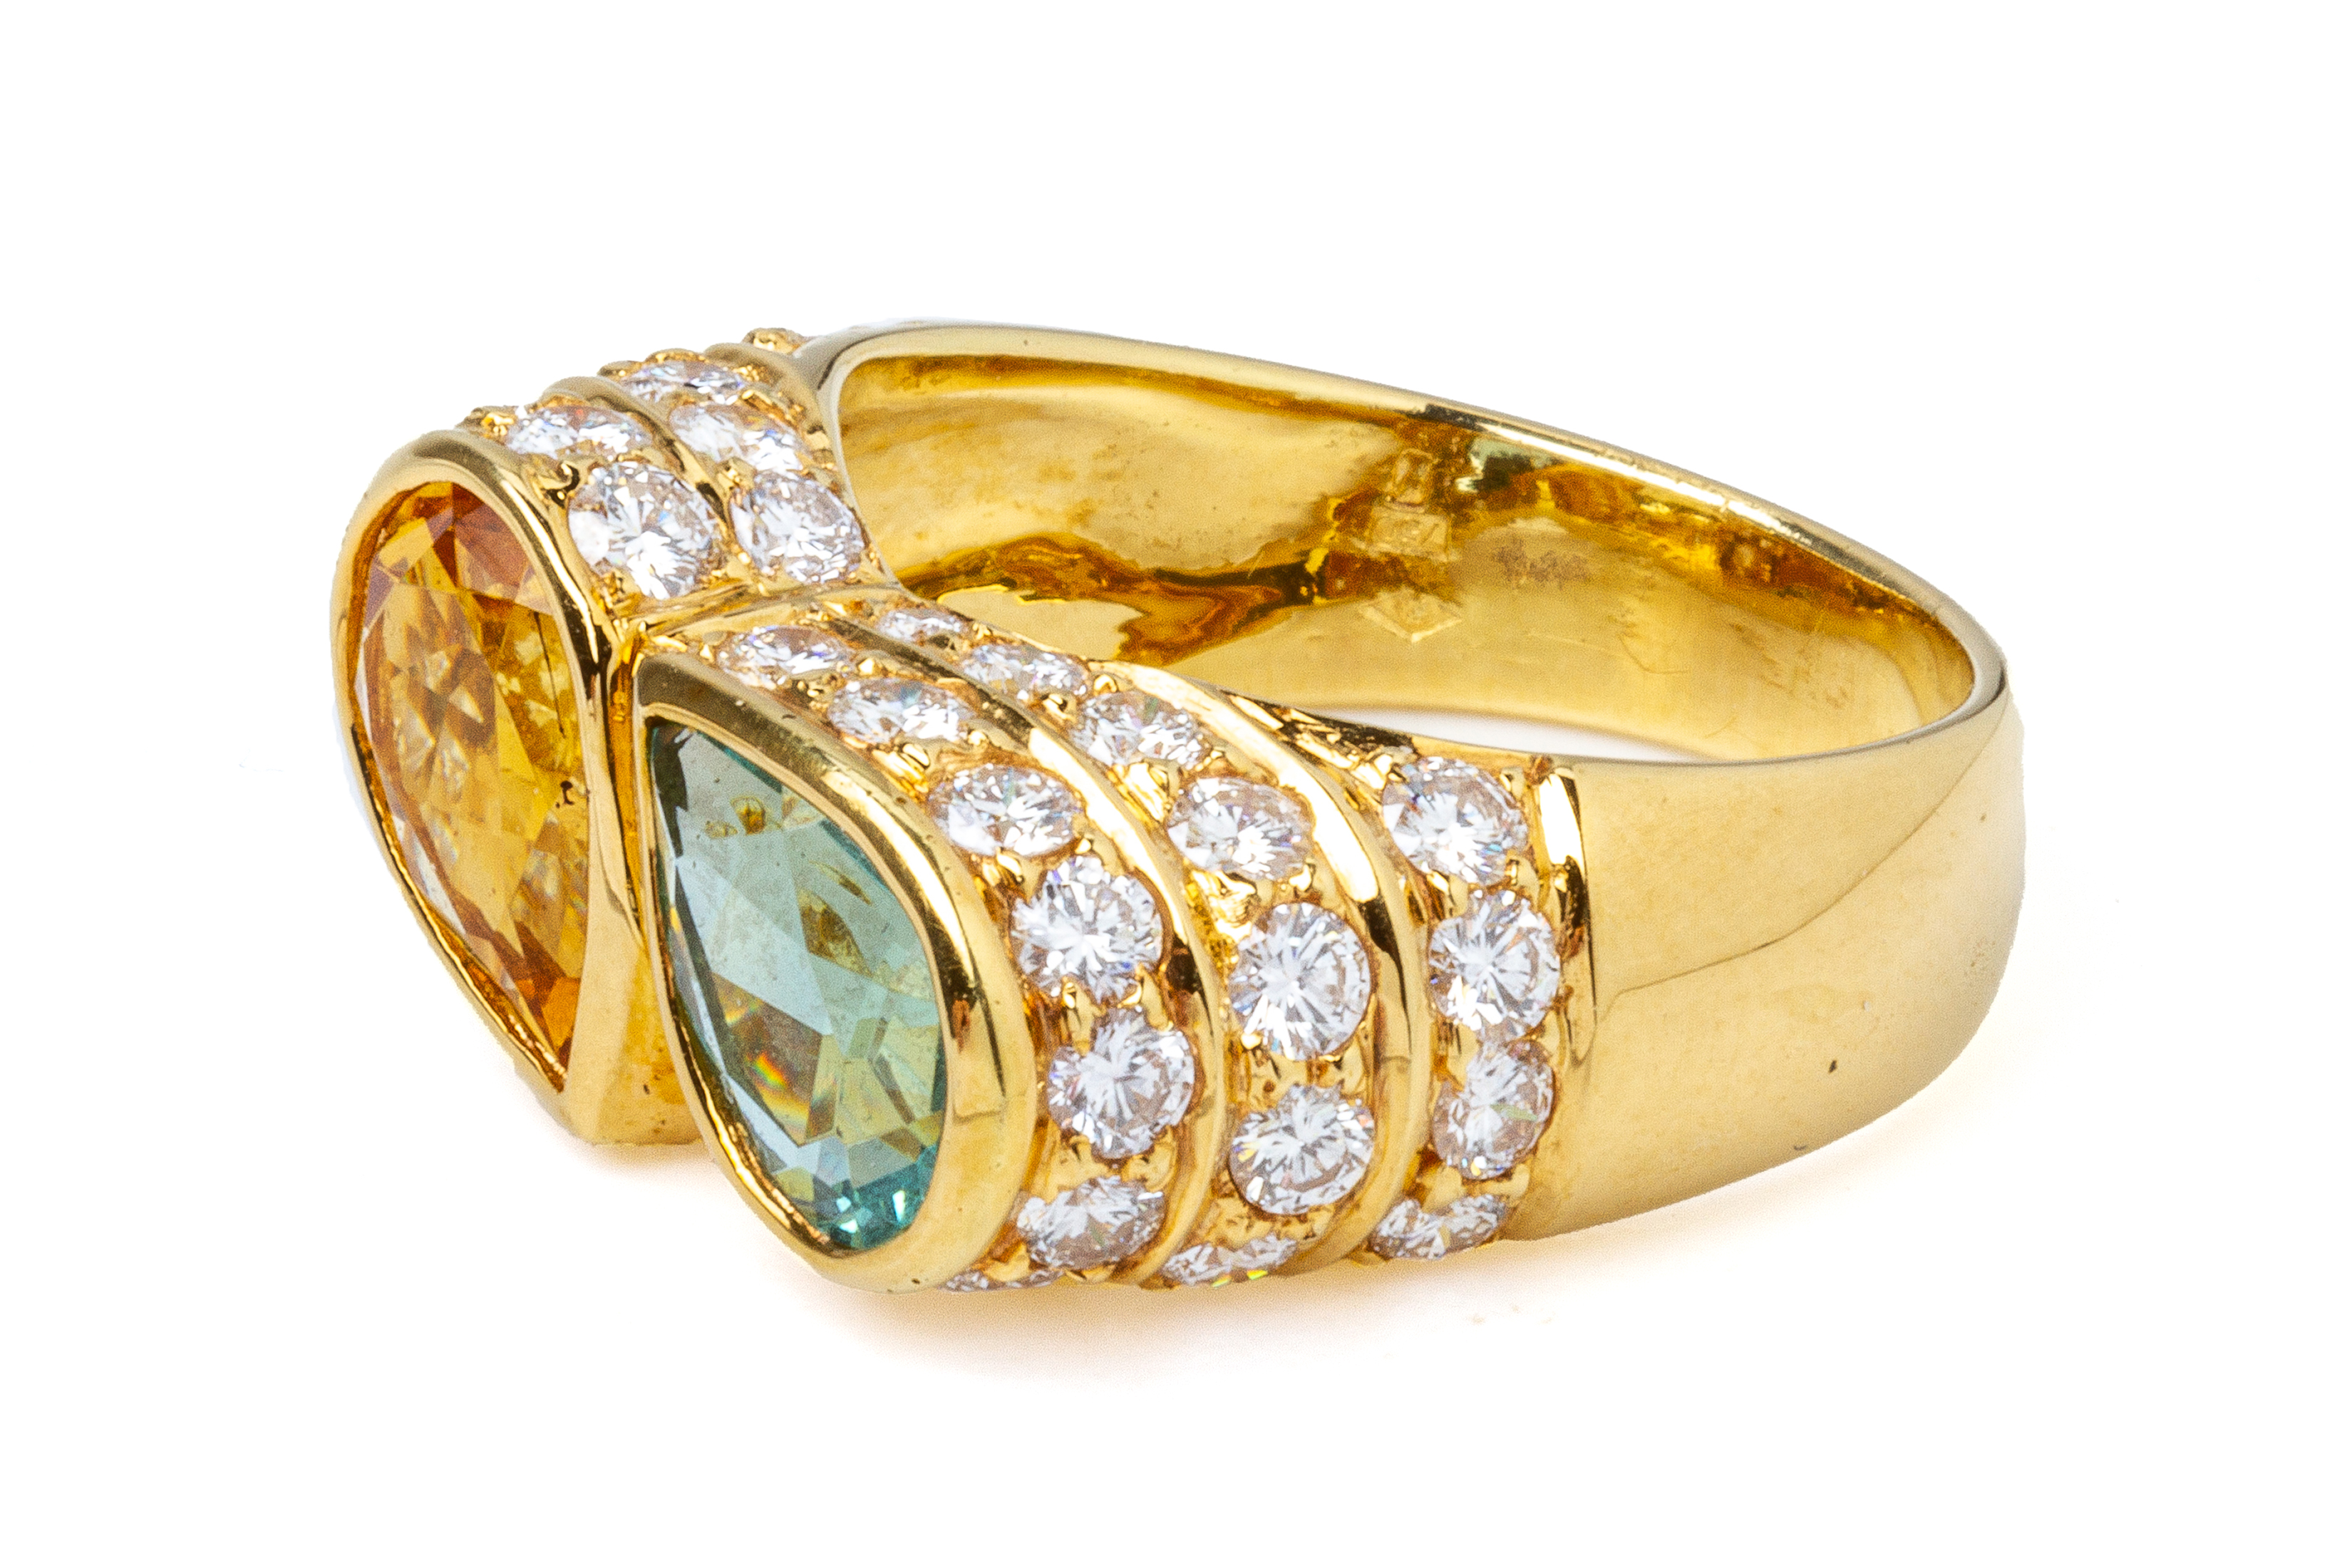 A CITRINE, DIAMOND AND BLUE STONE 'TOI ET MOI' RING - Image 2 of 4